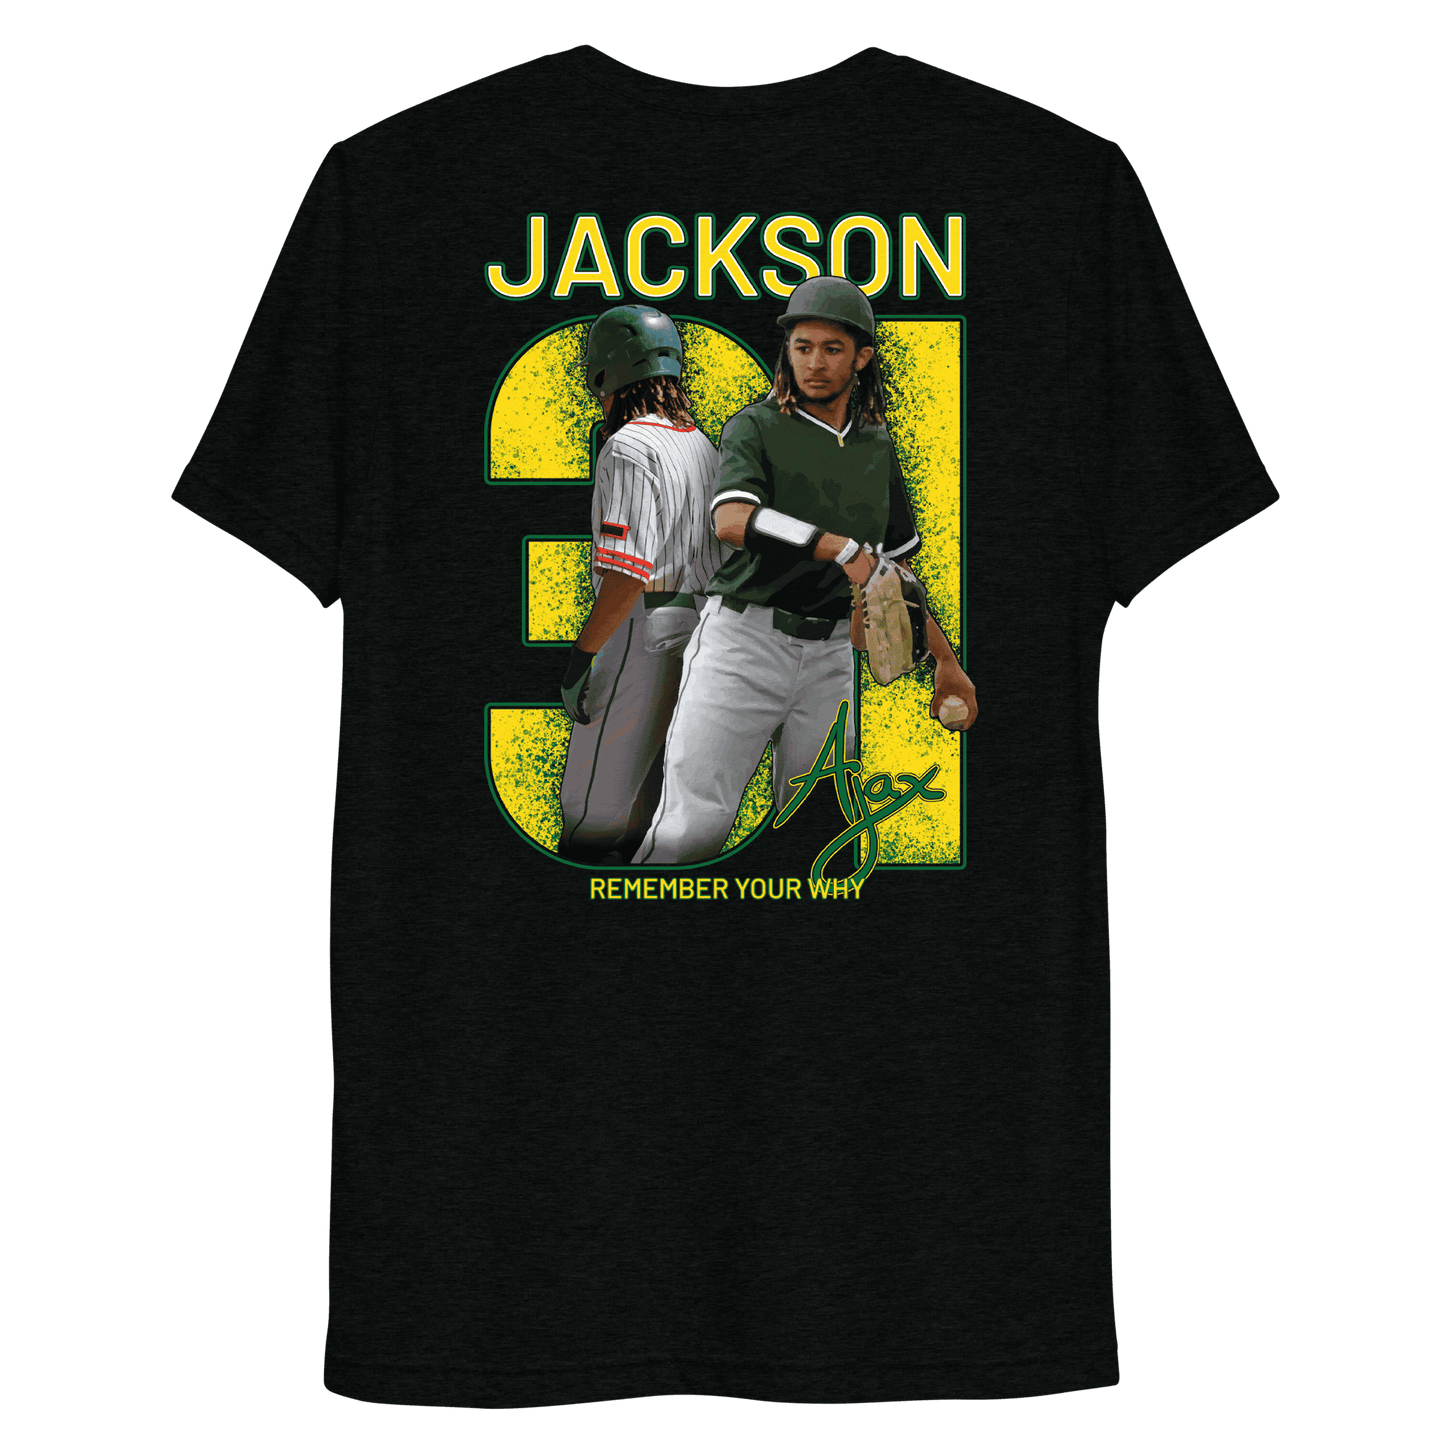 Anthony Jackson | Mural & Patch Performance Shirt - Clutch -